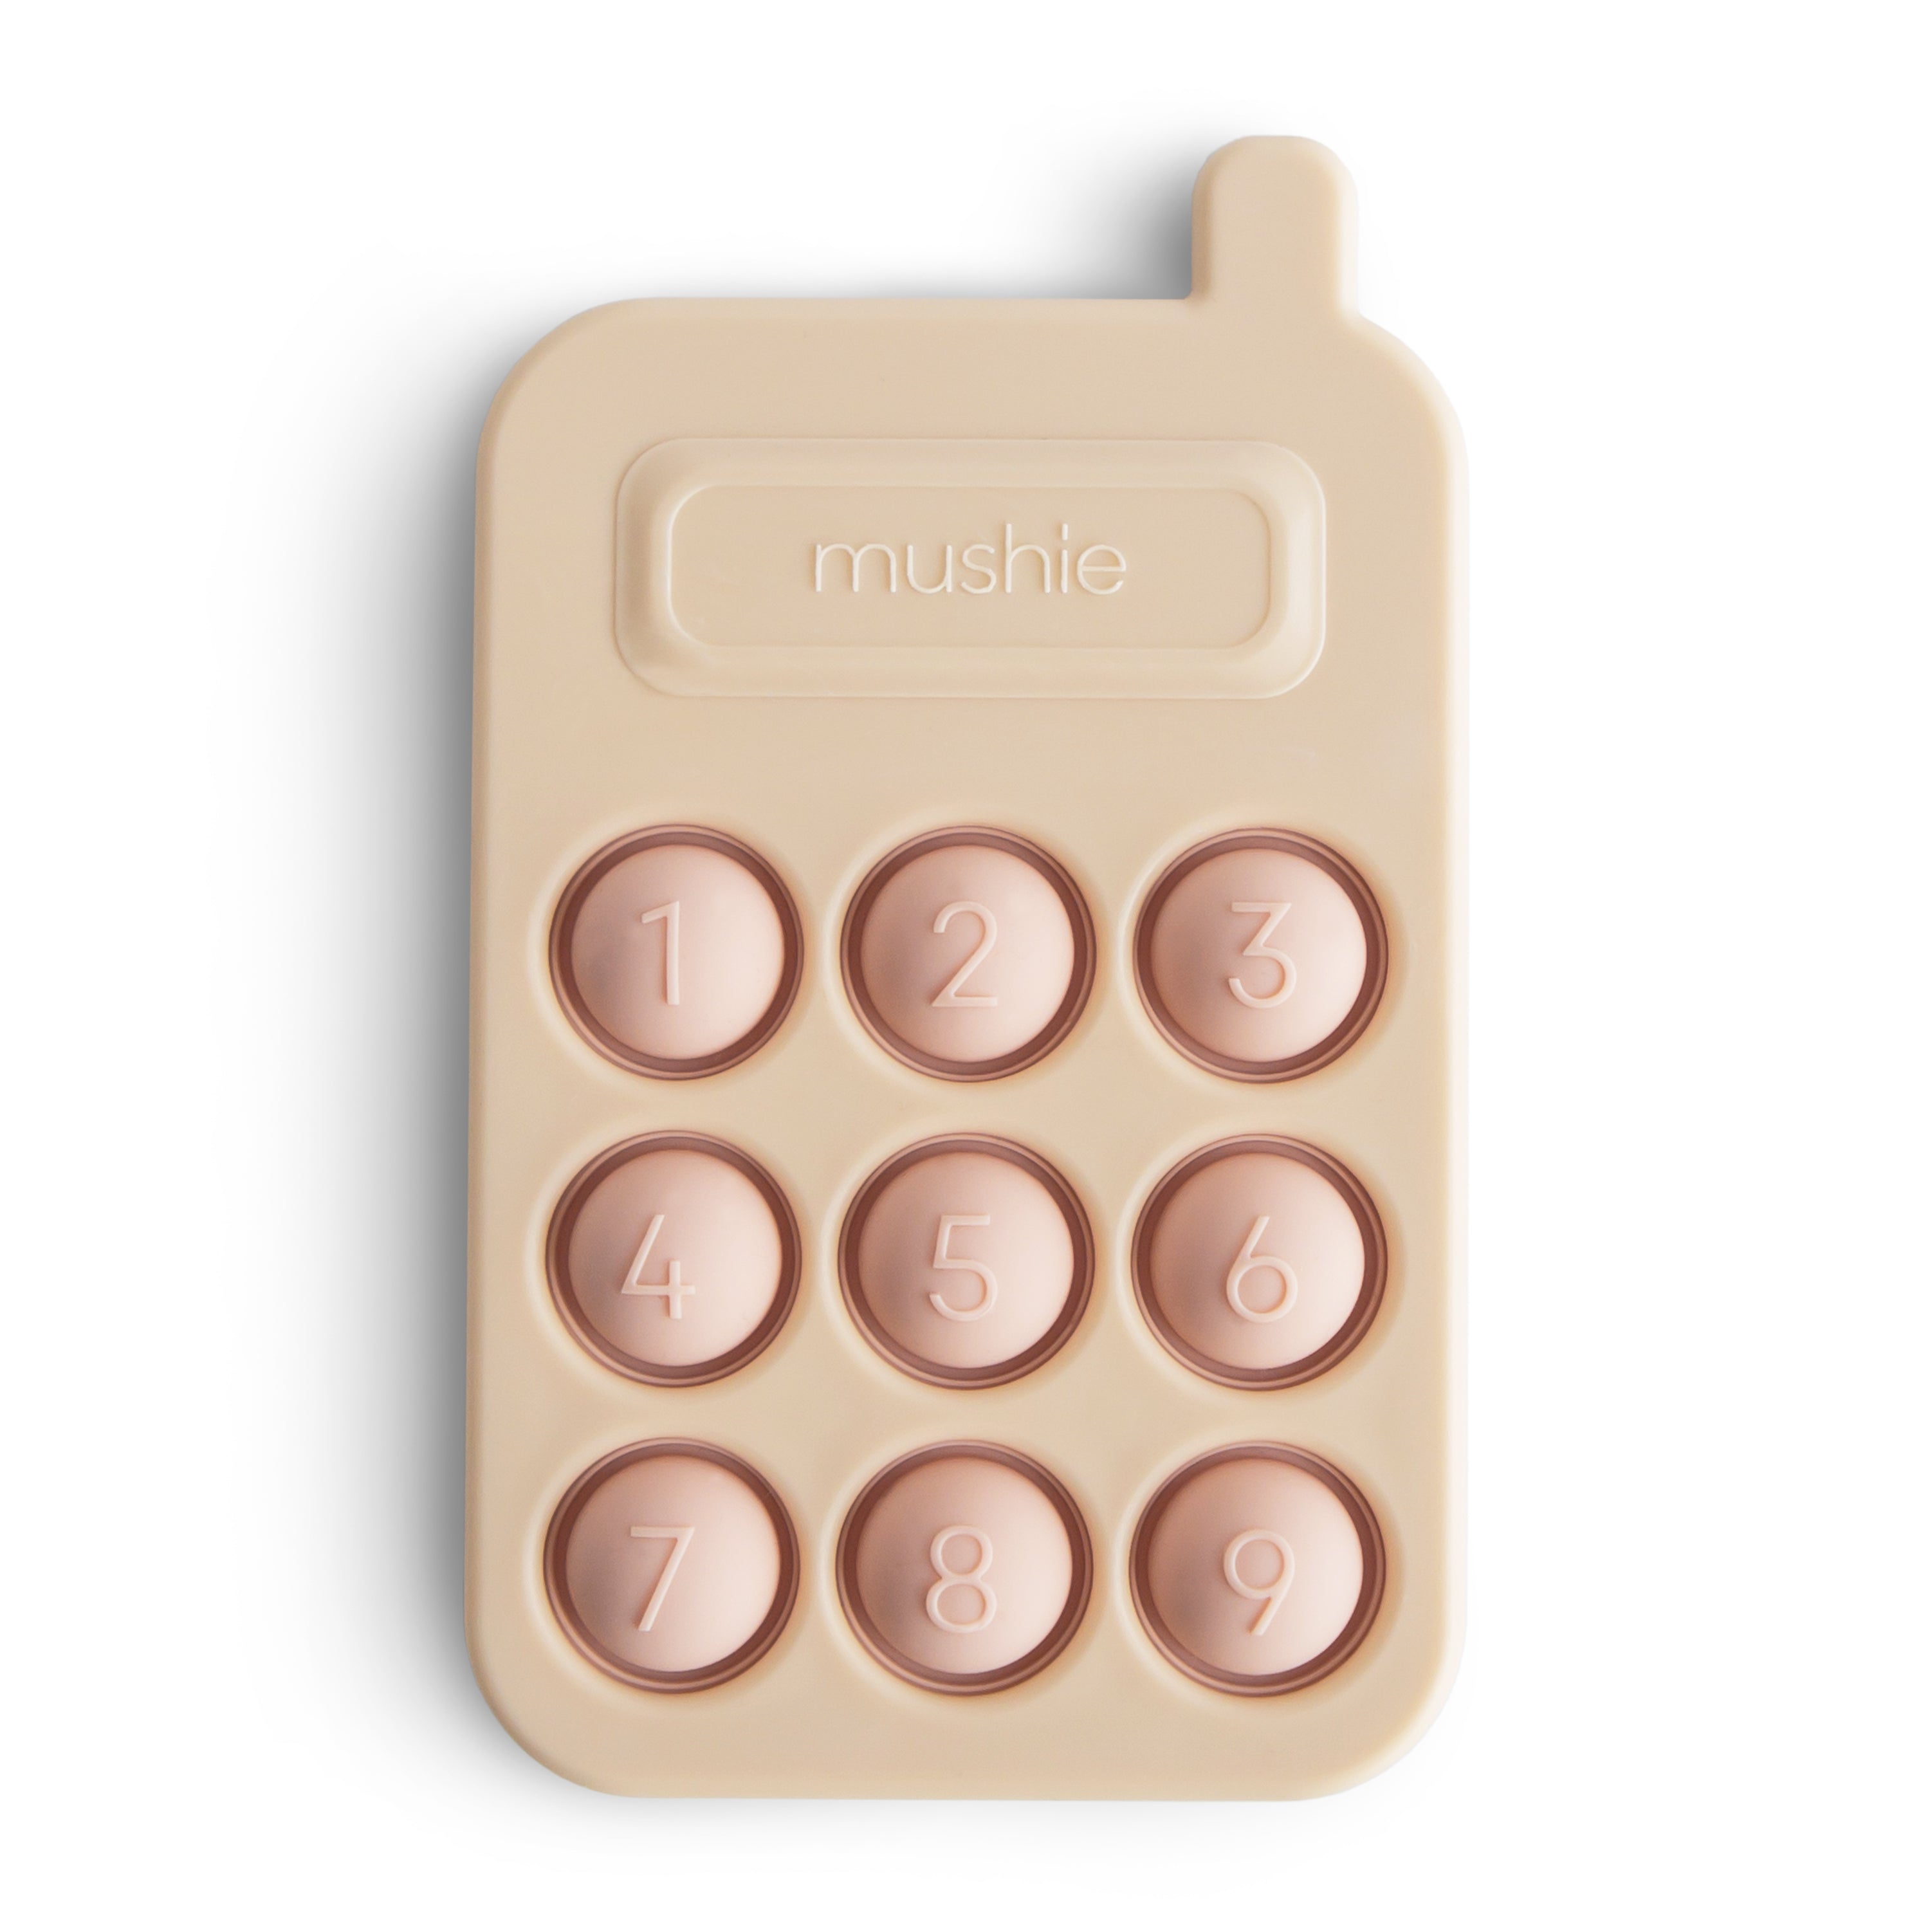 Mushie Phone Press Toy, Cambridge Blush Featured – ANB Baby